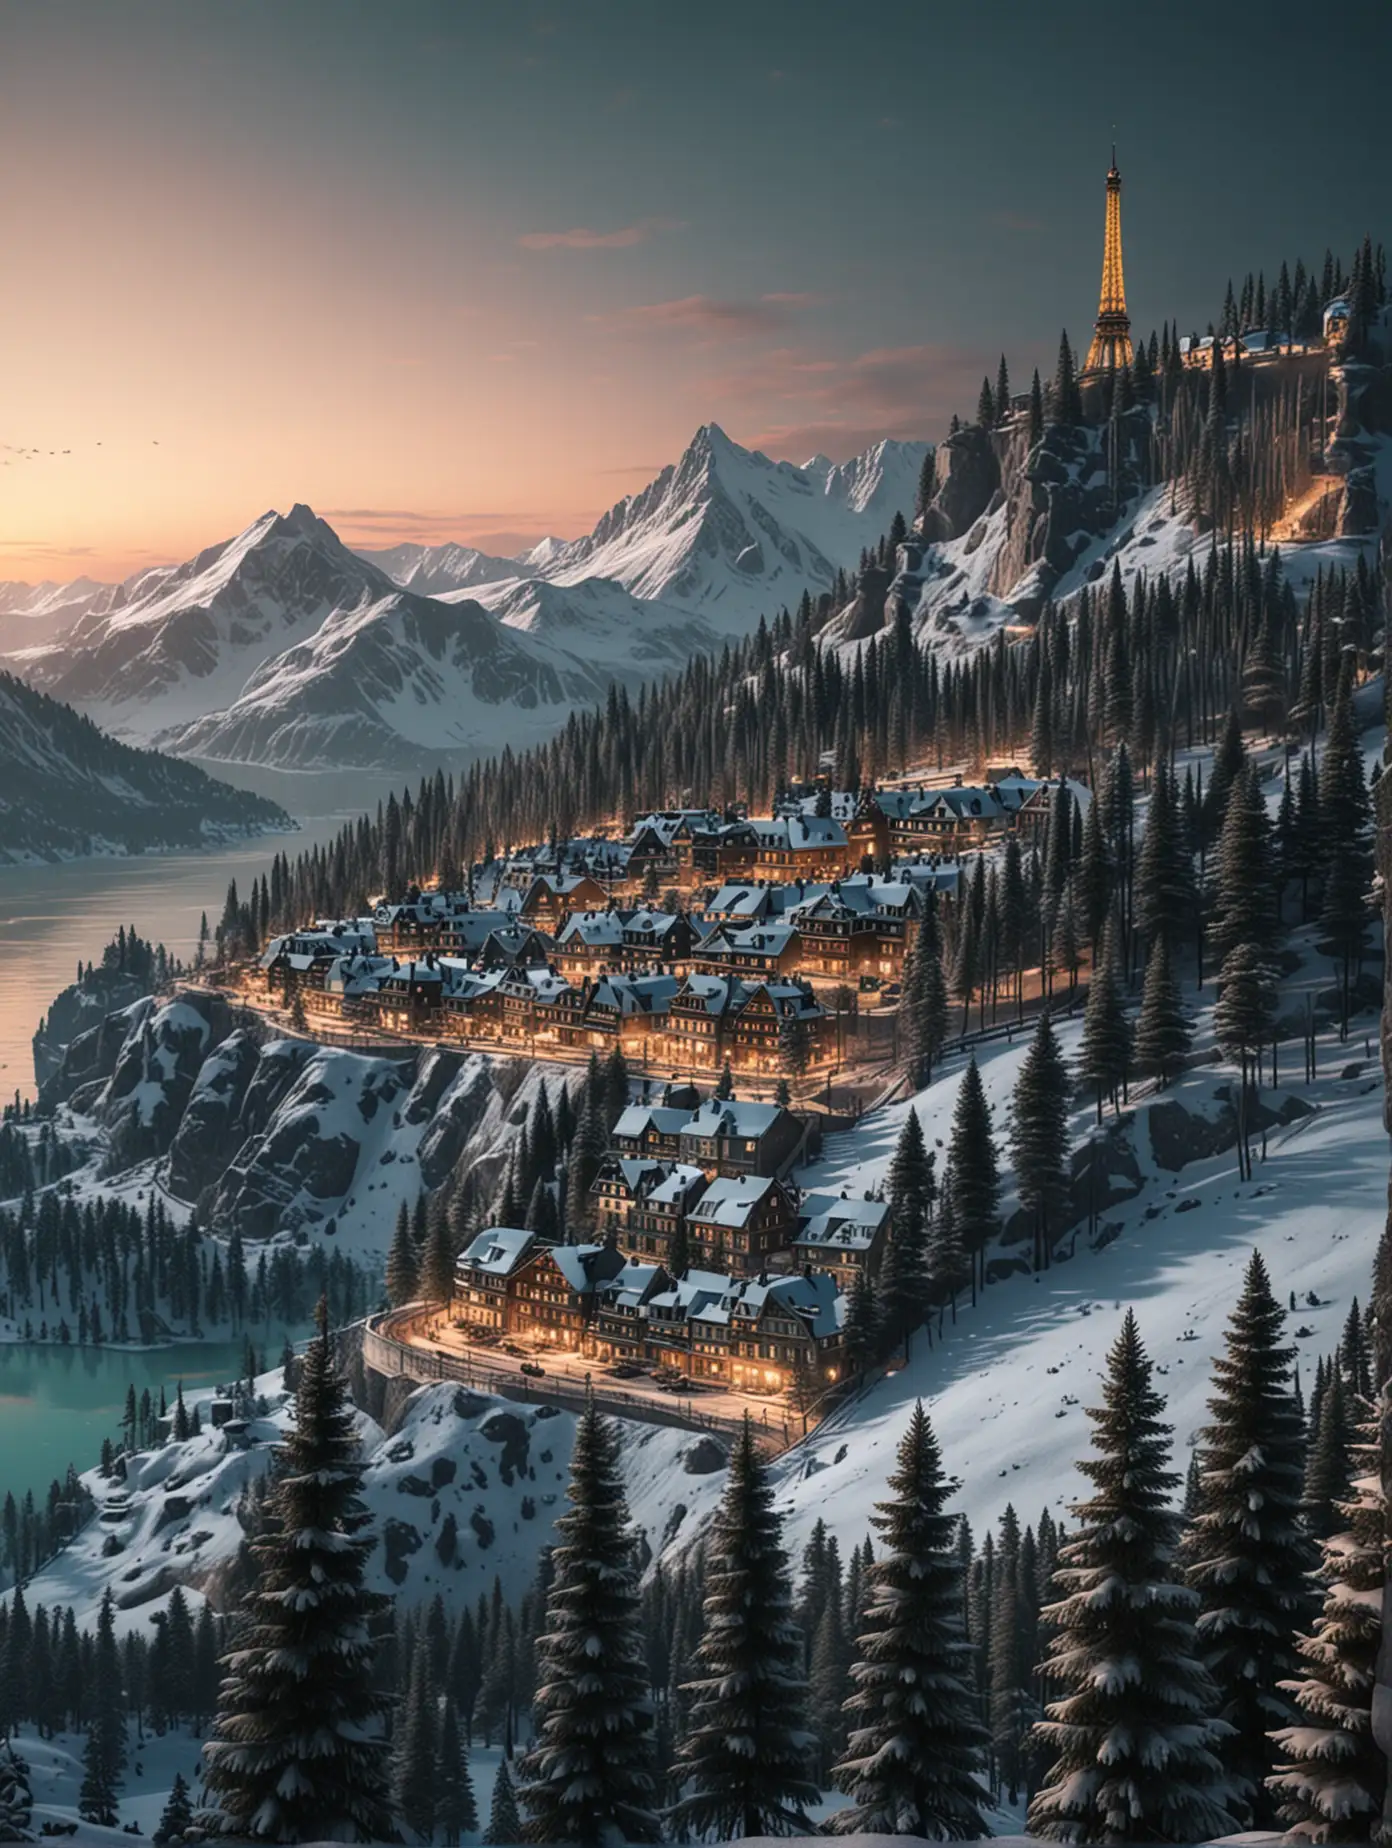 Snow Mountain Landscape with Pine Trees Lighted Houses and Eiffel Tower at Sunset